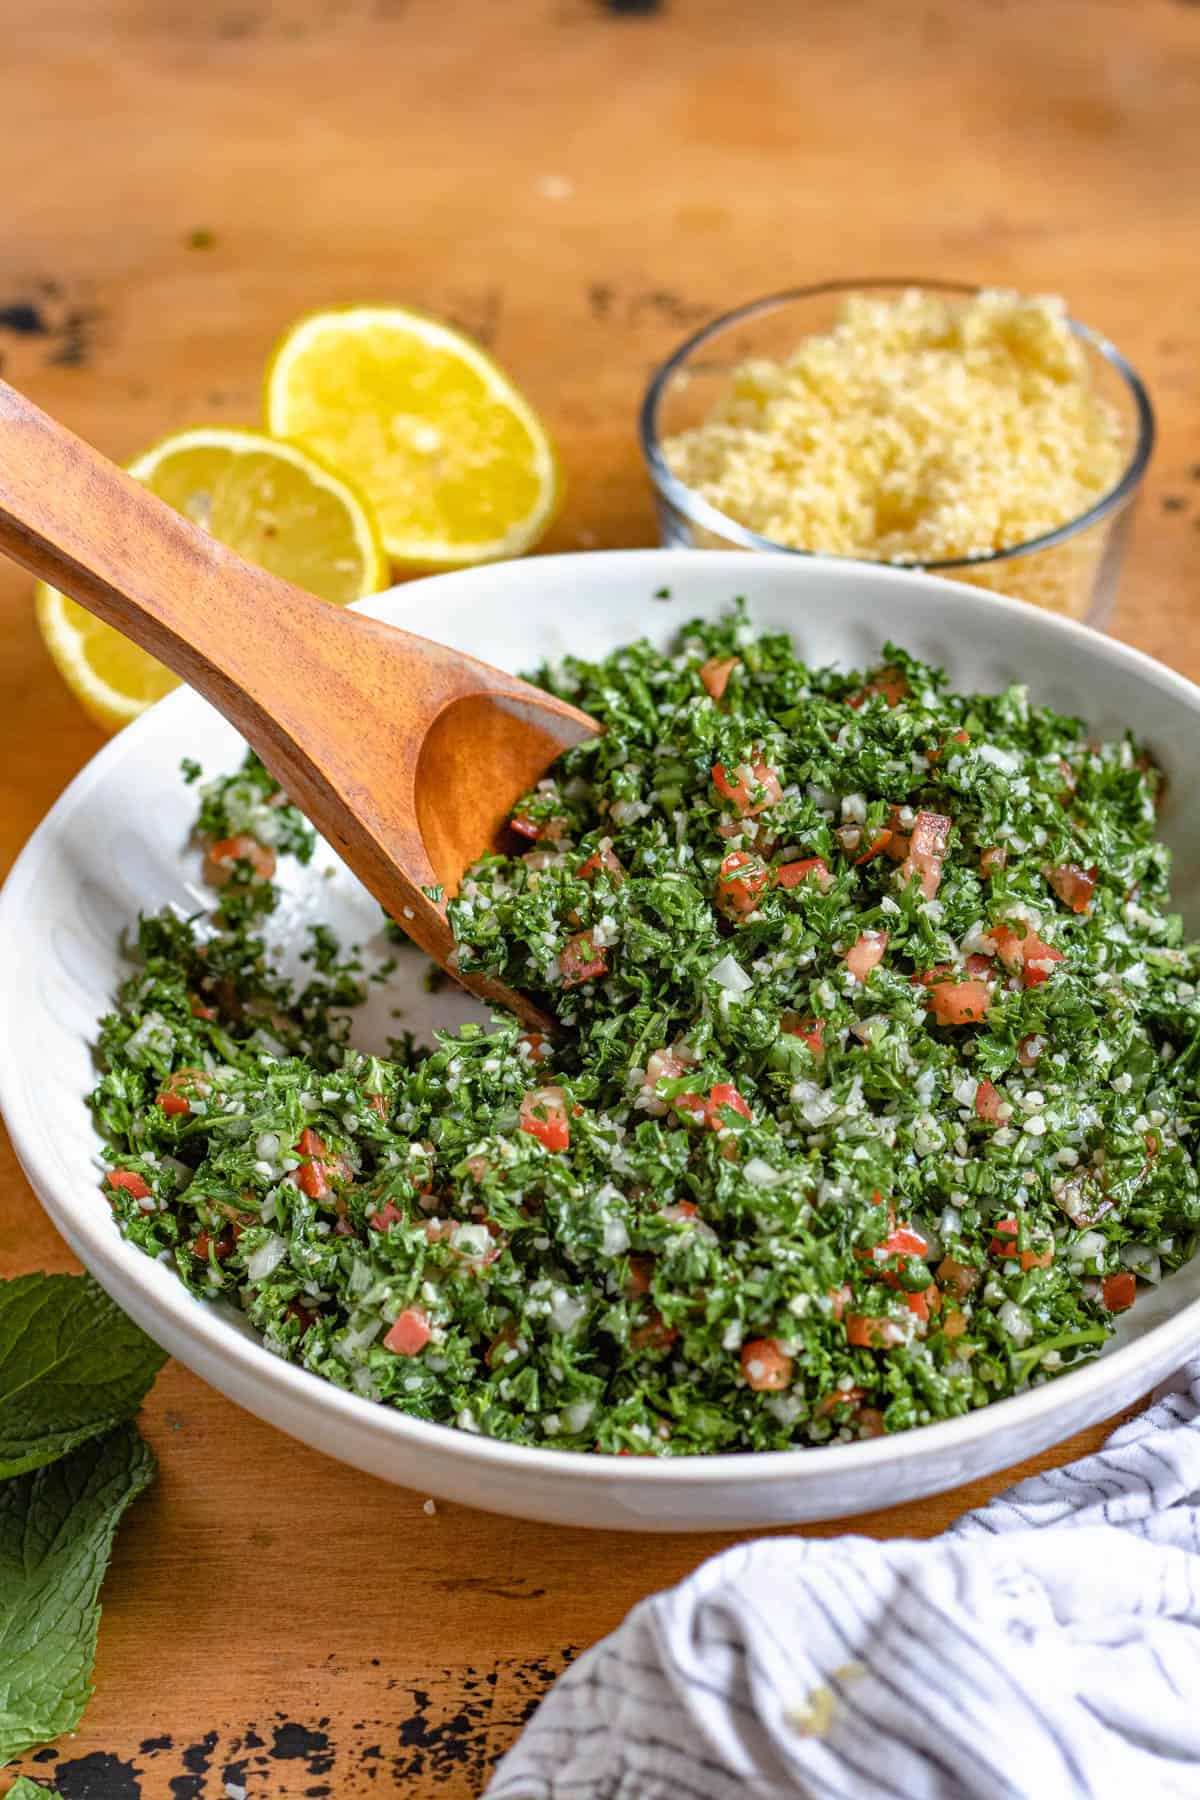 Tabbouli salad in a bowl with a wooden spoon resting in it and lemon halves laying next to the bowl. 